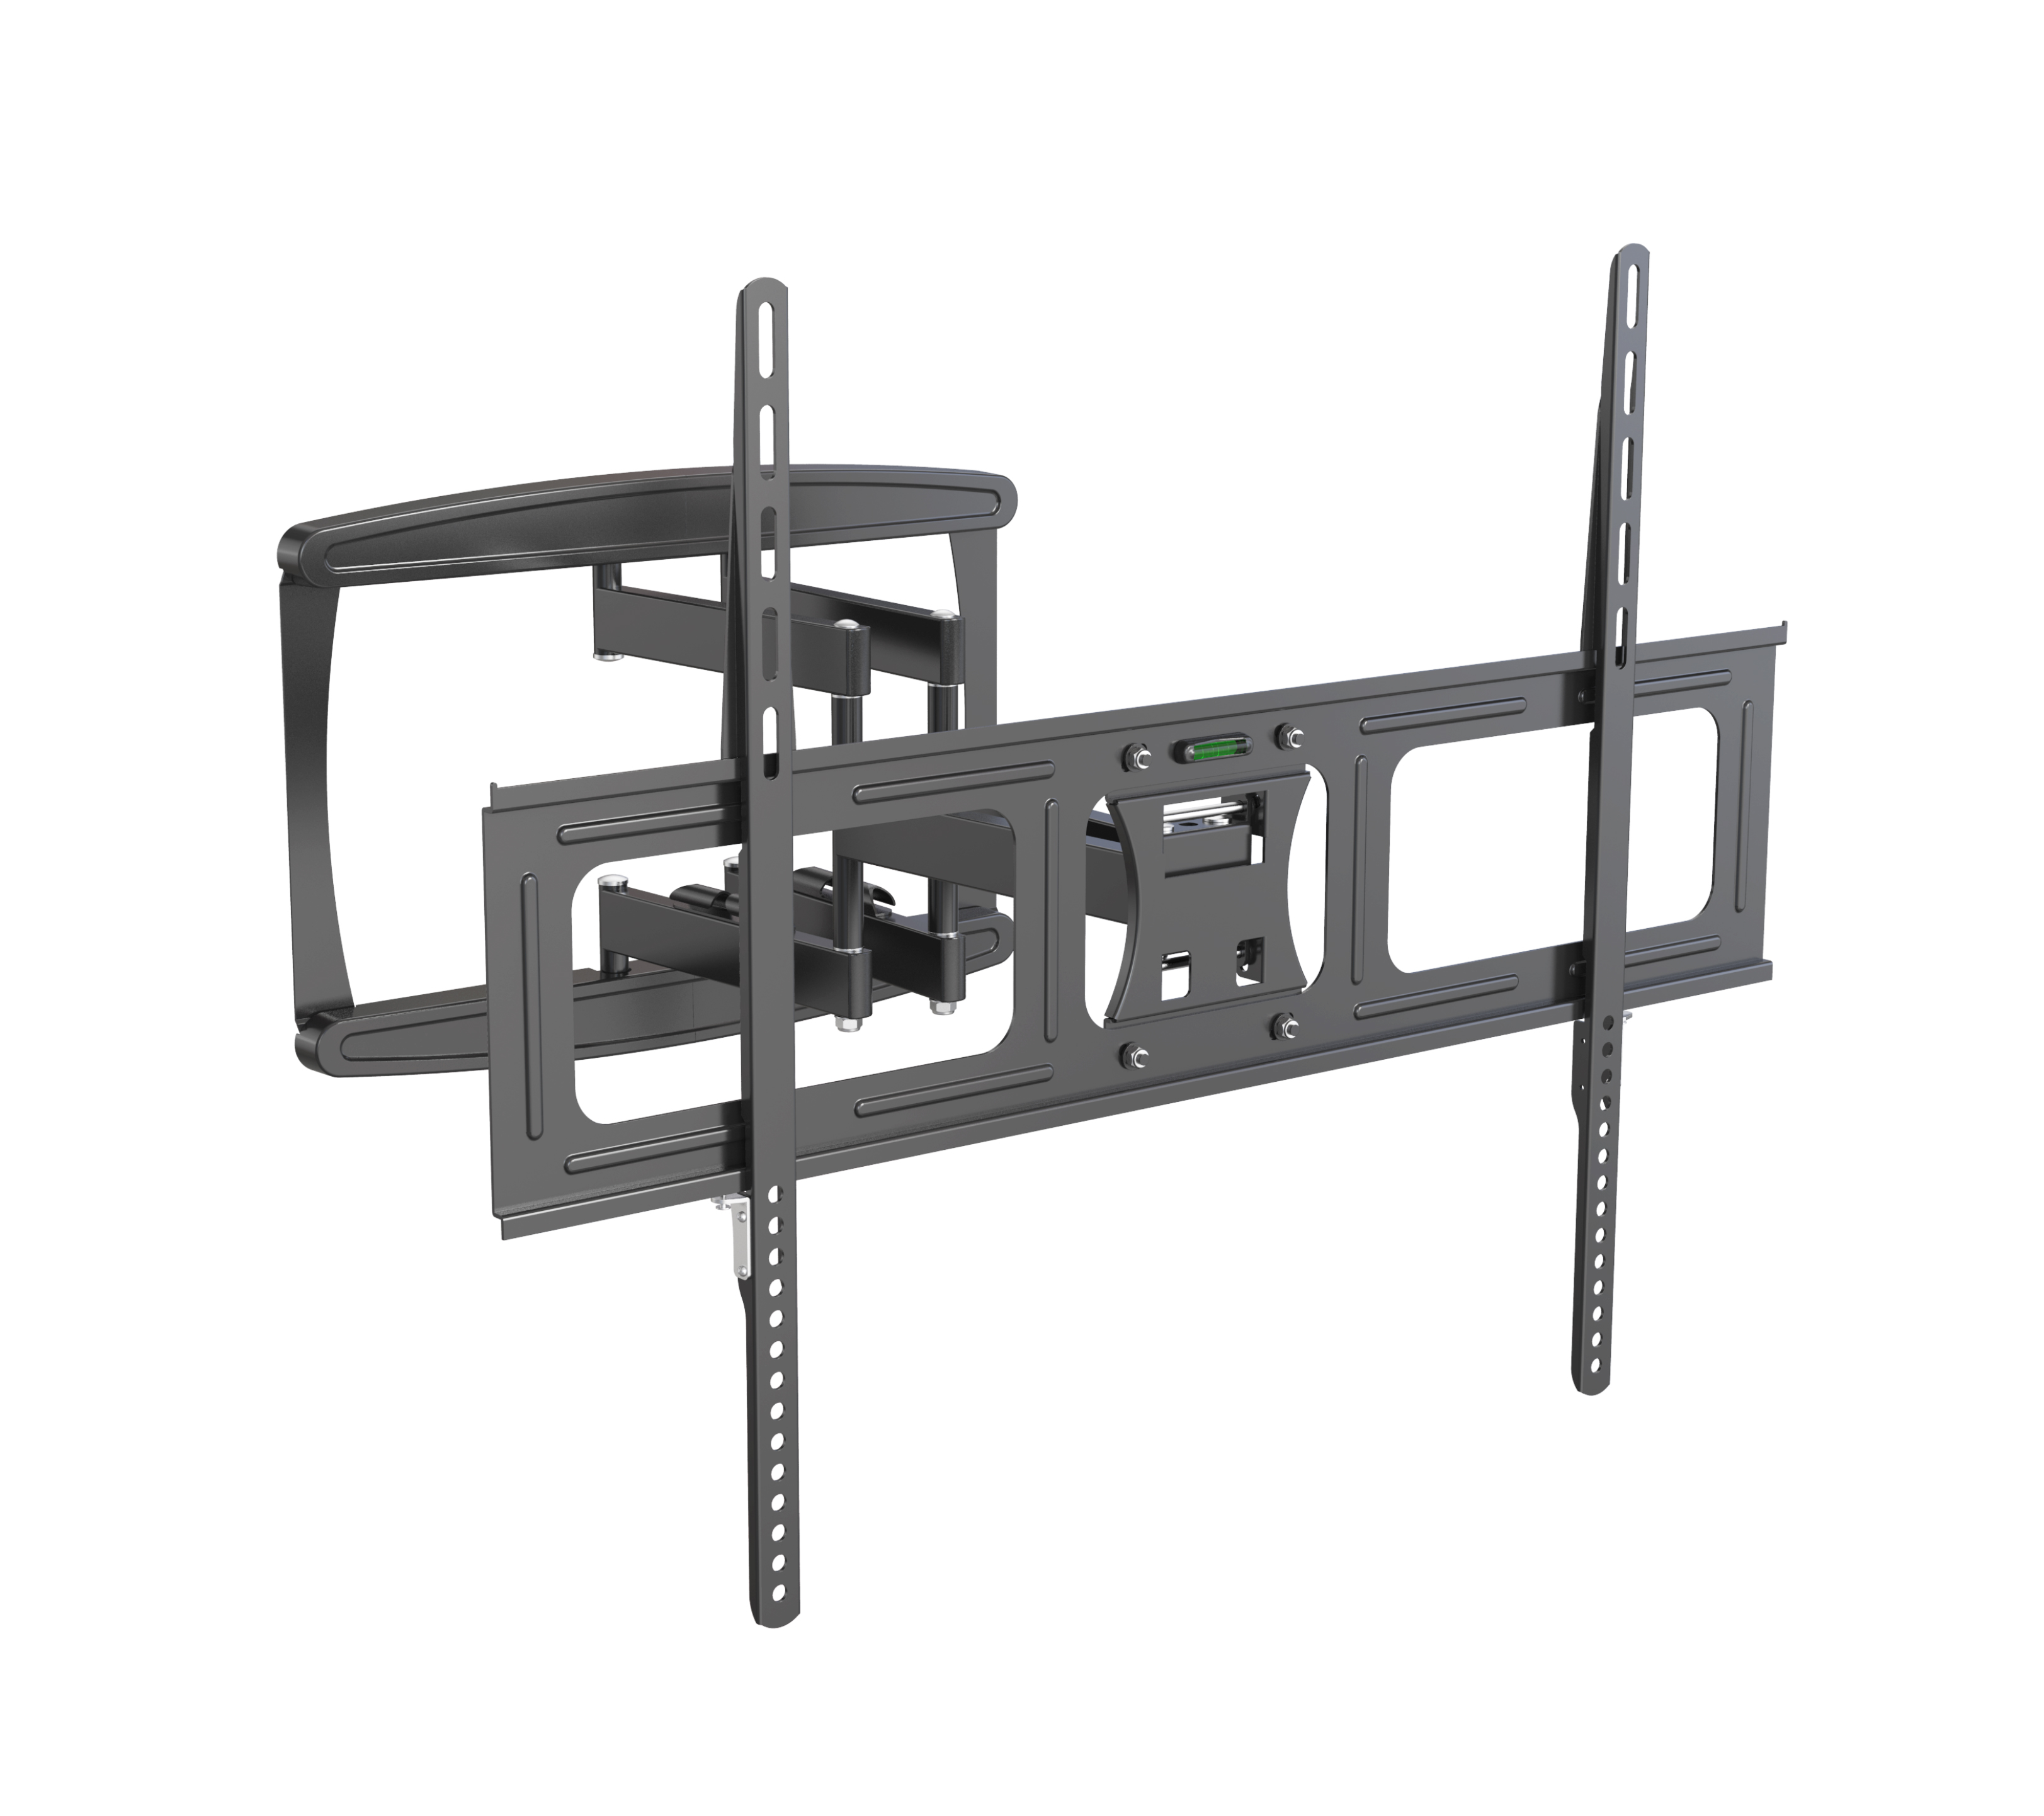 Full Motion TV Wall Mount for Most 42-80 Inches TVs VM-LT19